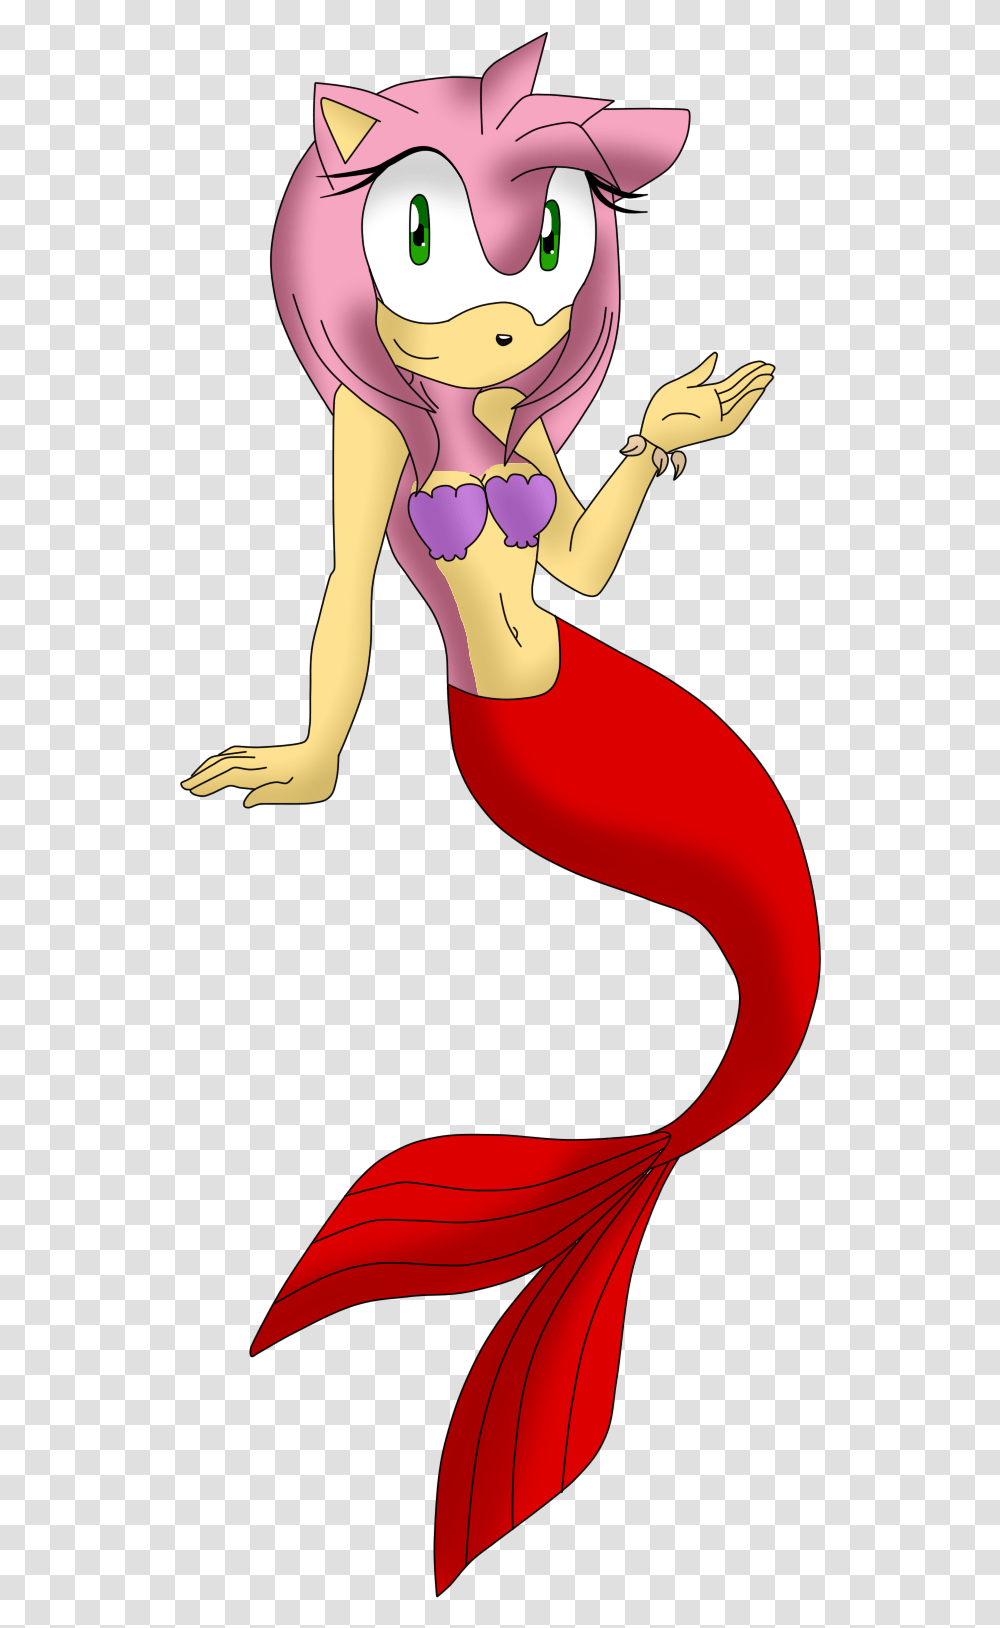 Pc Mermaid Amy Rose By Miss Aquatic Amy Rose As A Mermaid, Apparel, Leisure Activities Transparent Png